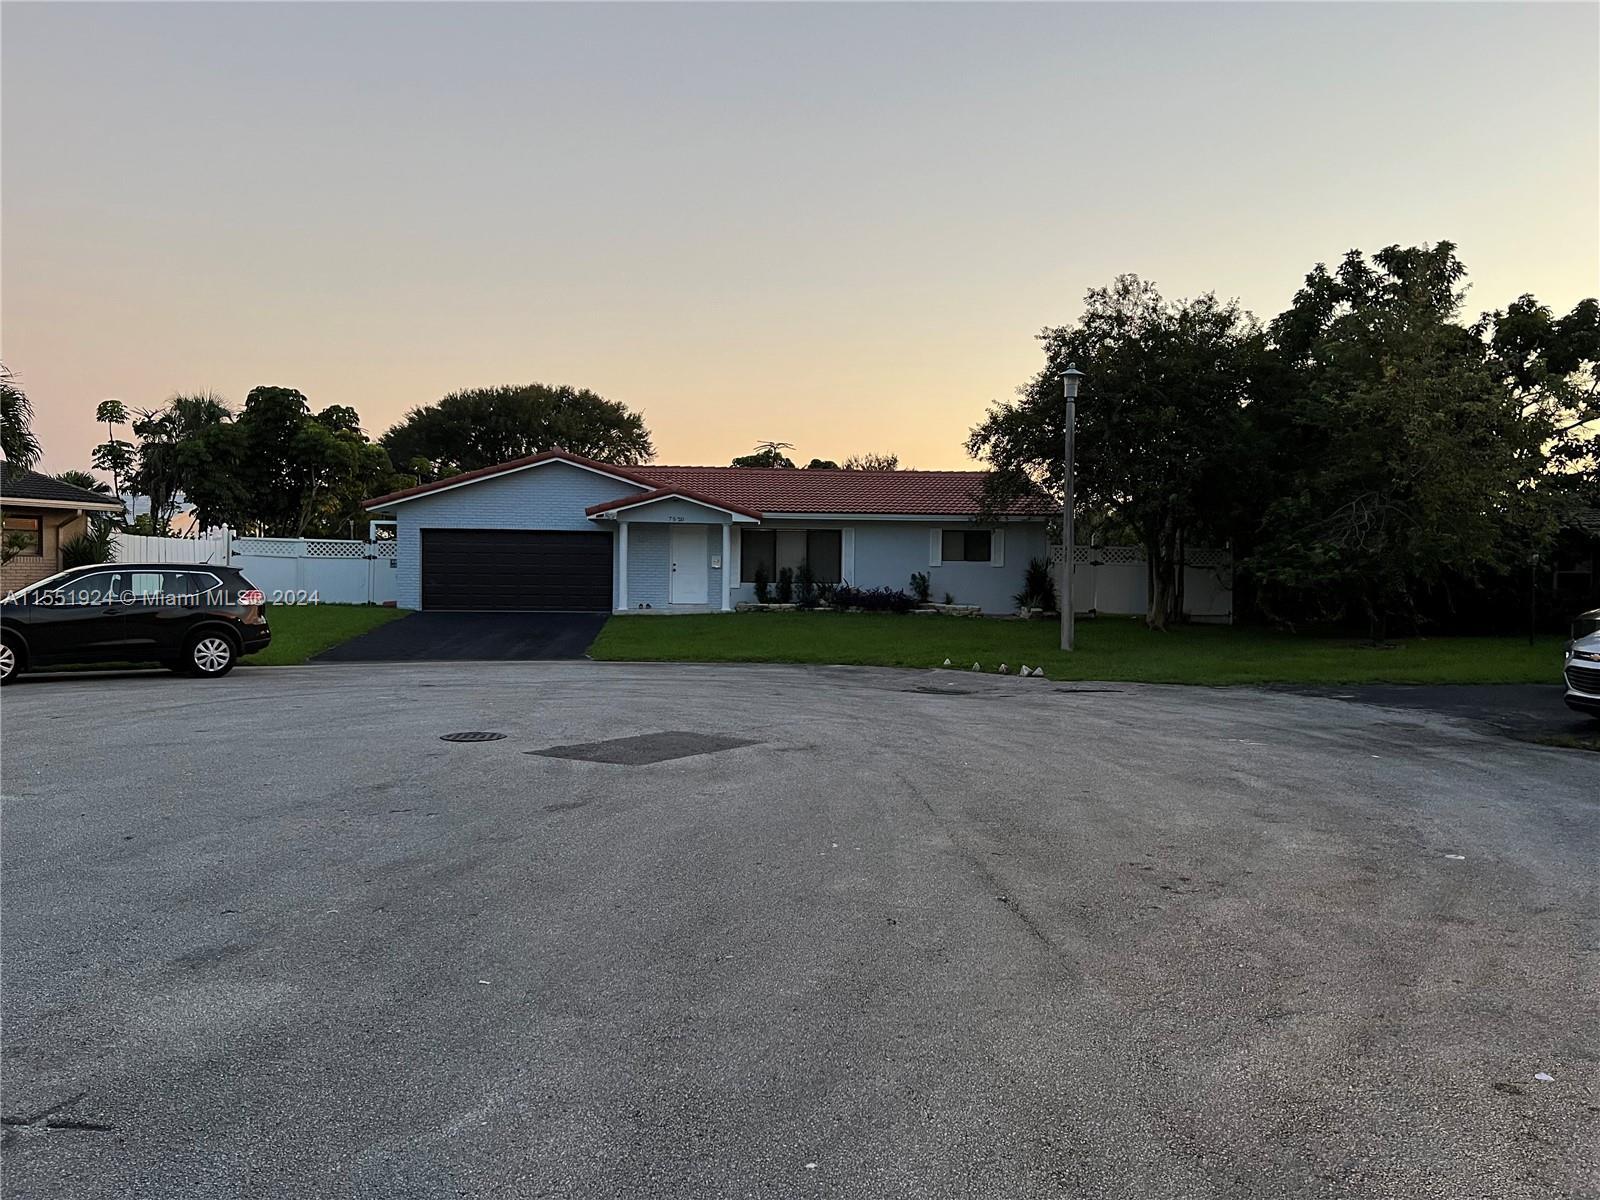 Photo of 7520 NW 44th Ct in Coral Springs, FL